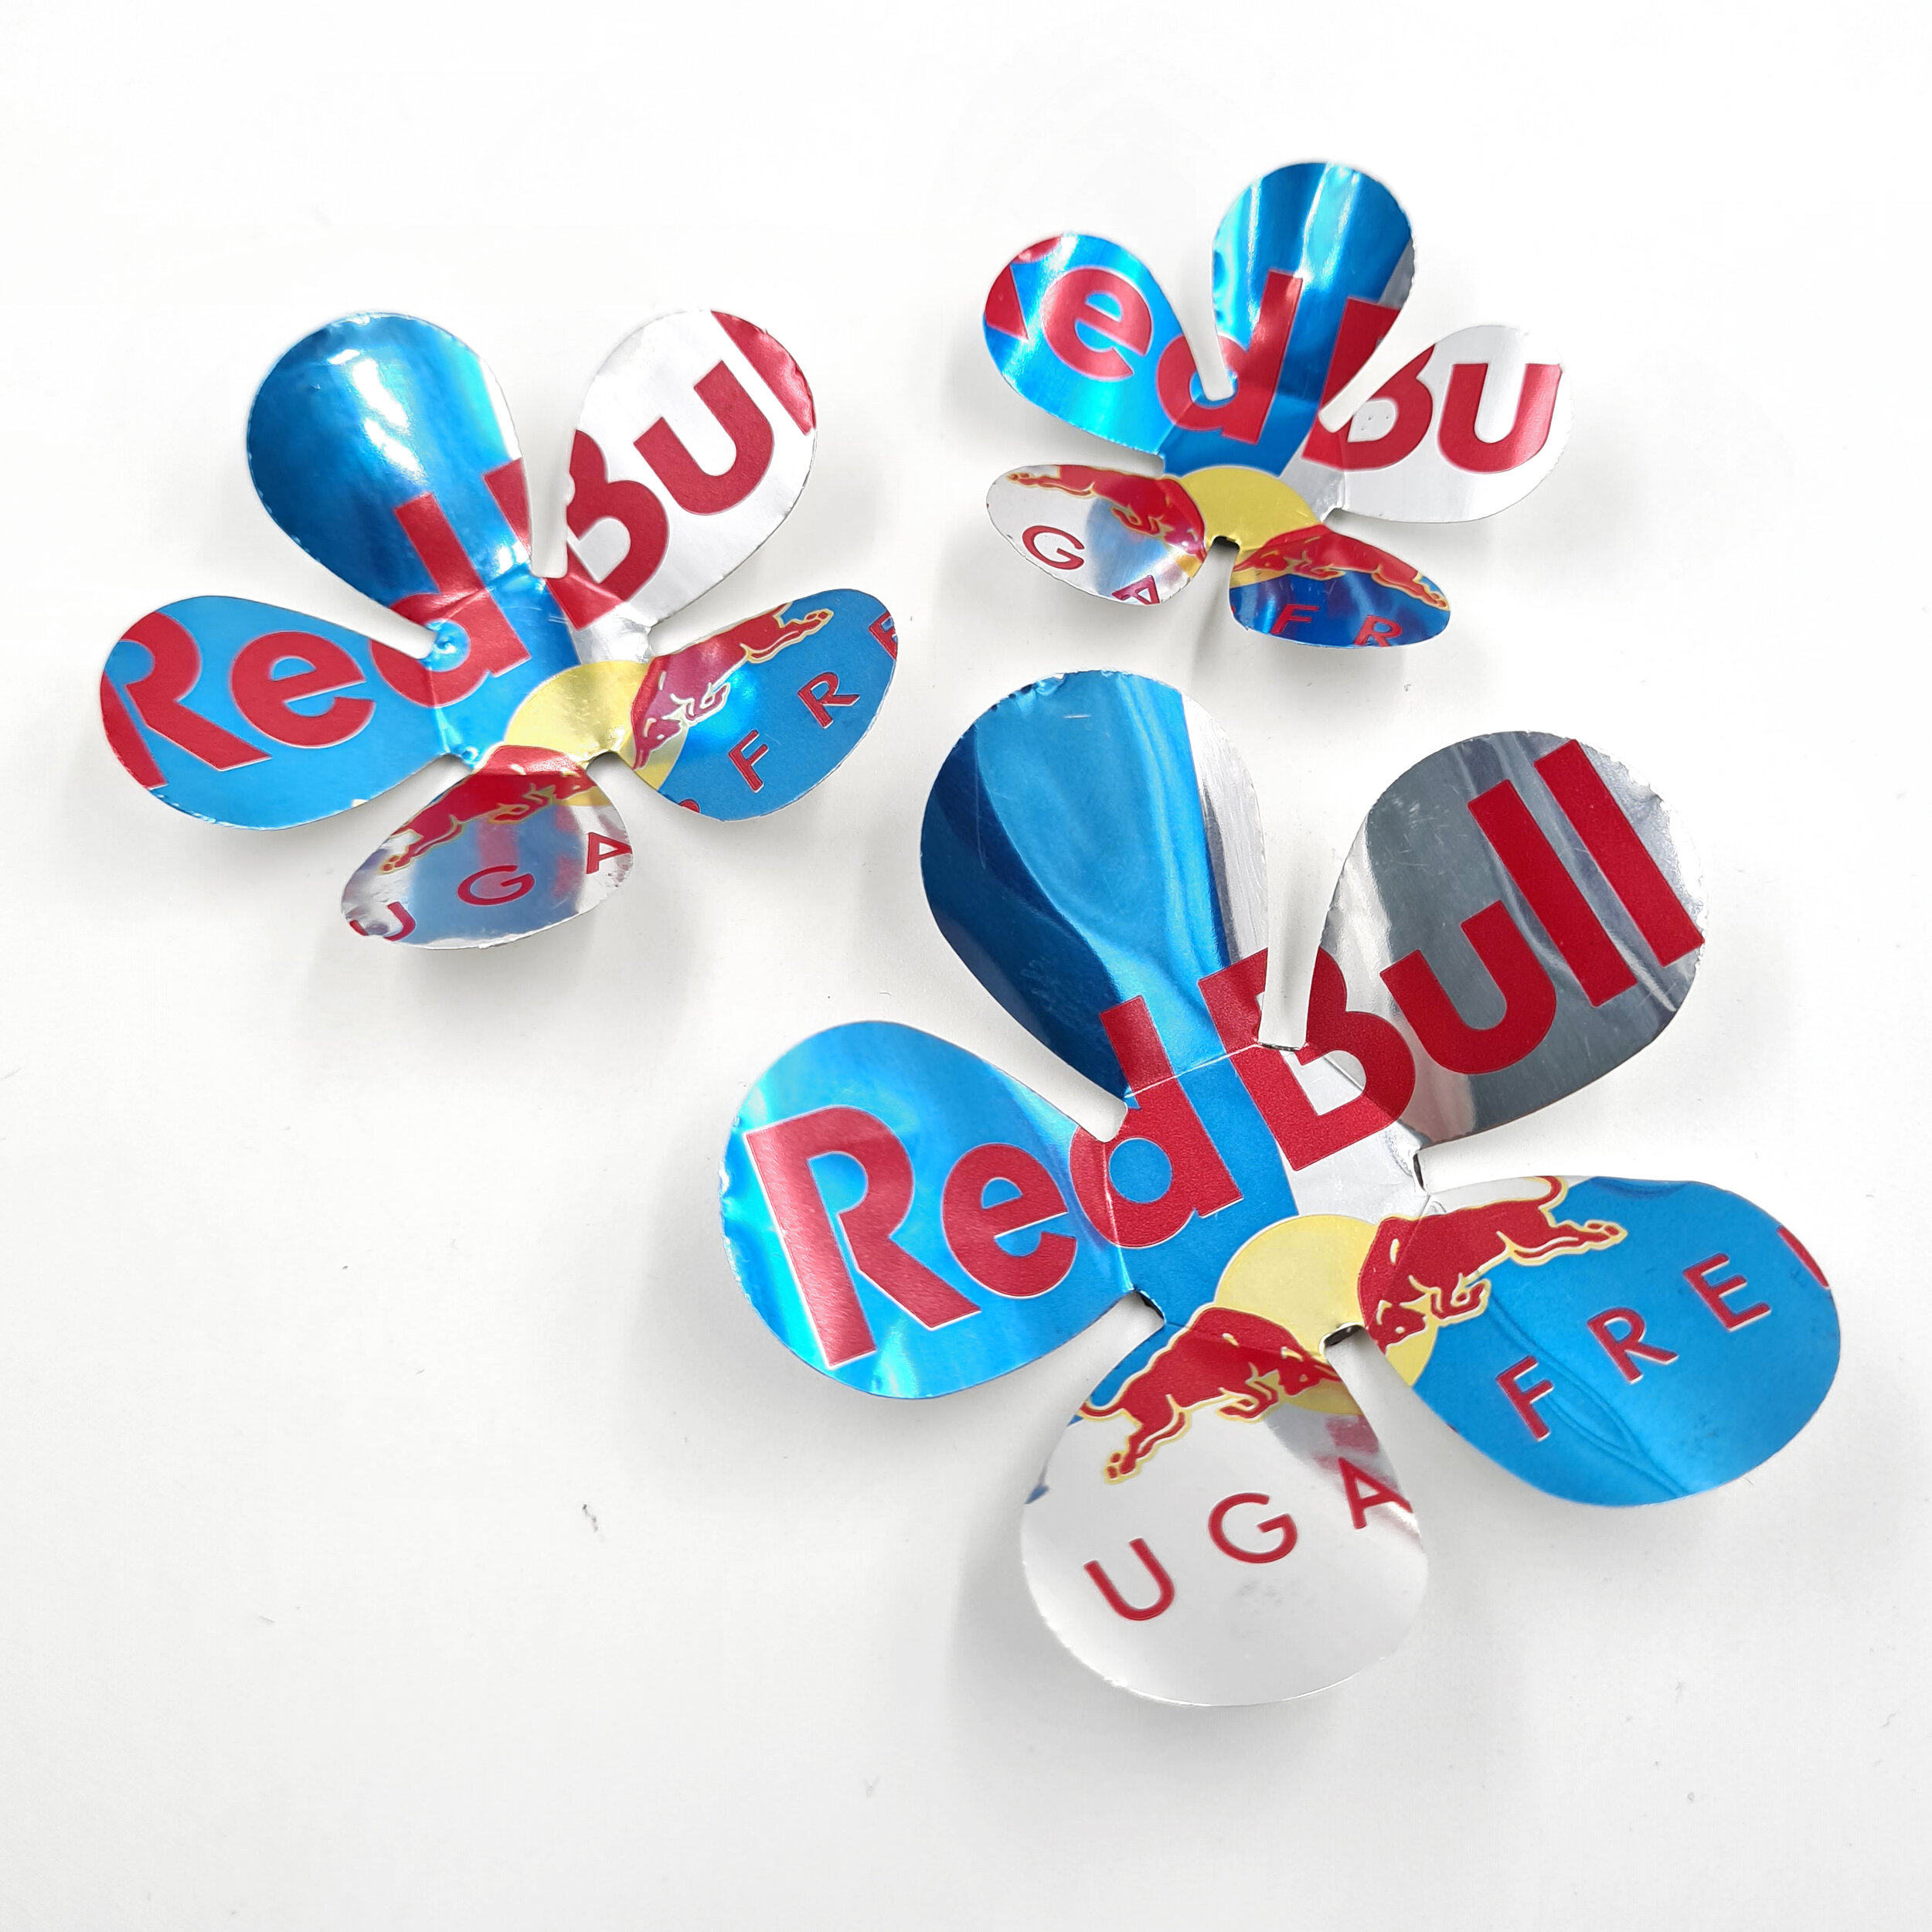 Vibrant blue Redbull Sugar Free upcycled Can Flower Magnets 